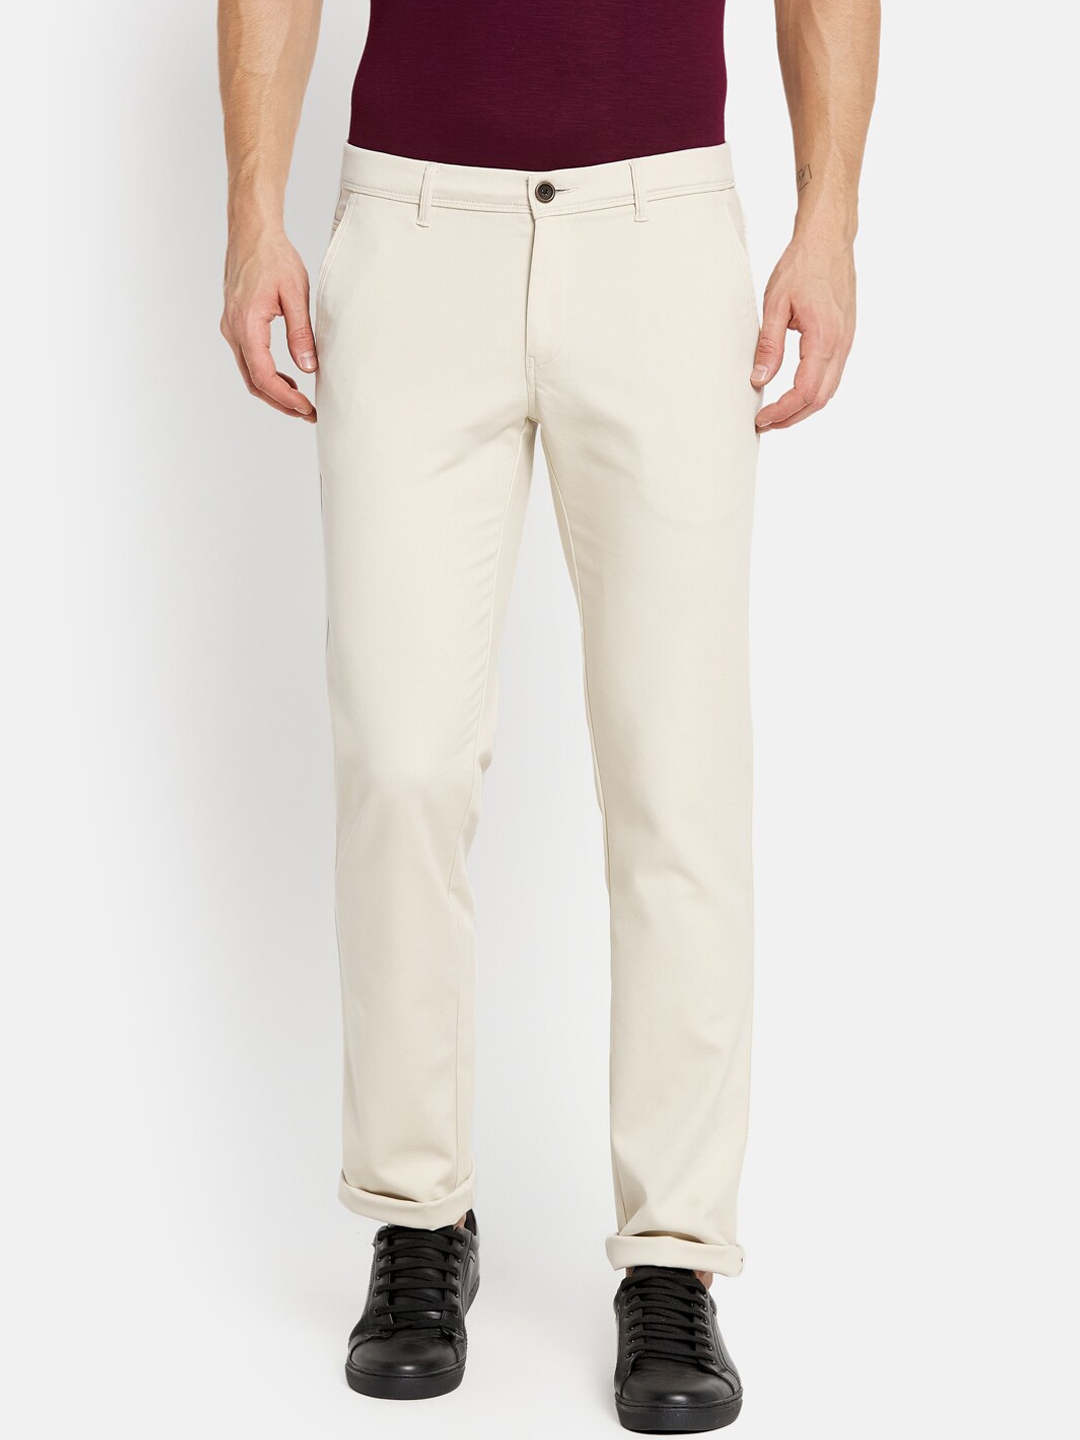 Buy Octave Men White Trousers - Trousers for Men 17852394 | Myntra